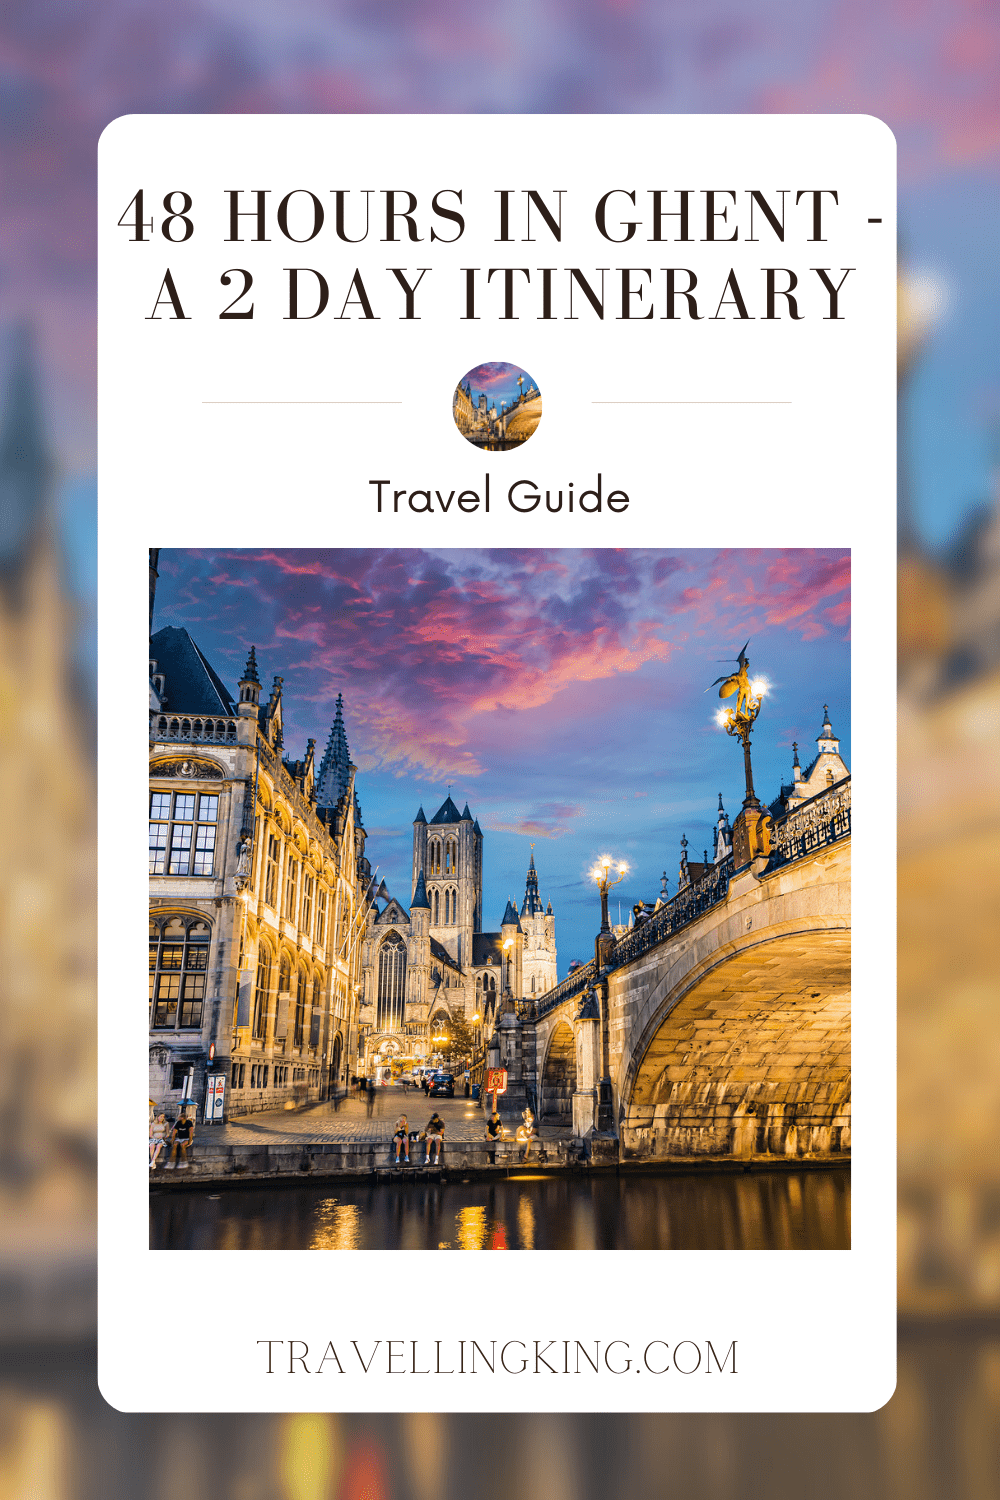 48 hours in Ghent - A 2 day Itinerary